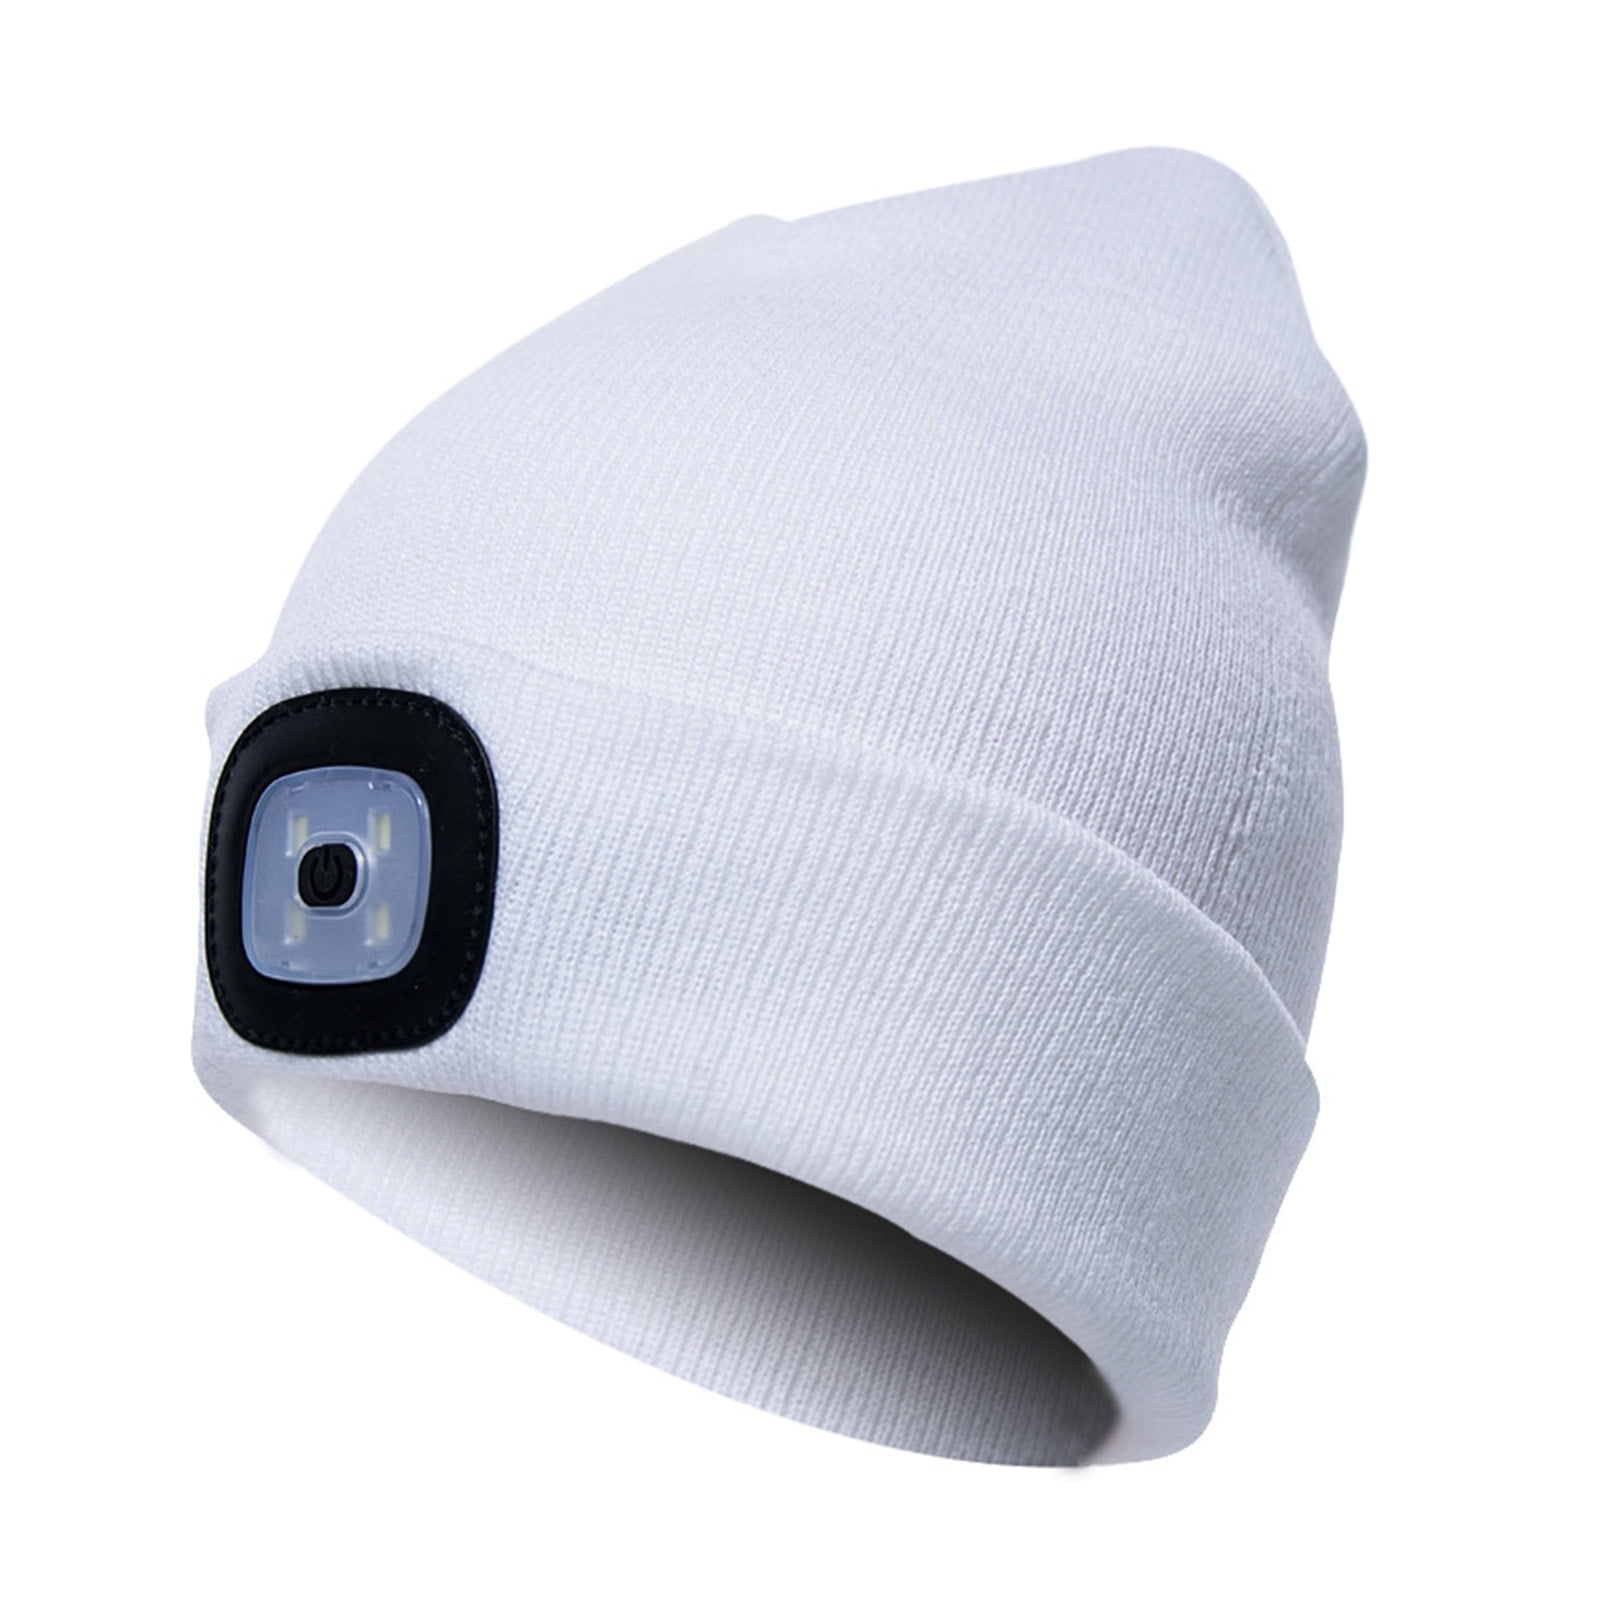 Unisex LED Beanie Hat With USB Rechargeable Battery High Powered Light UK STOCK 